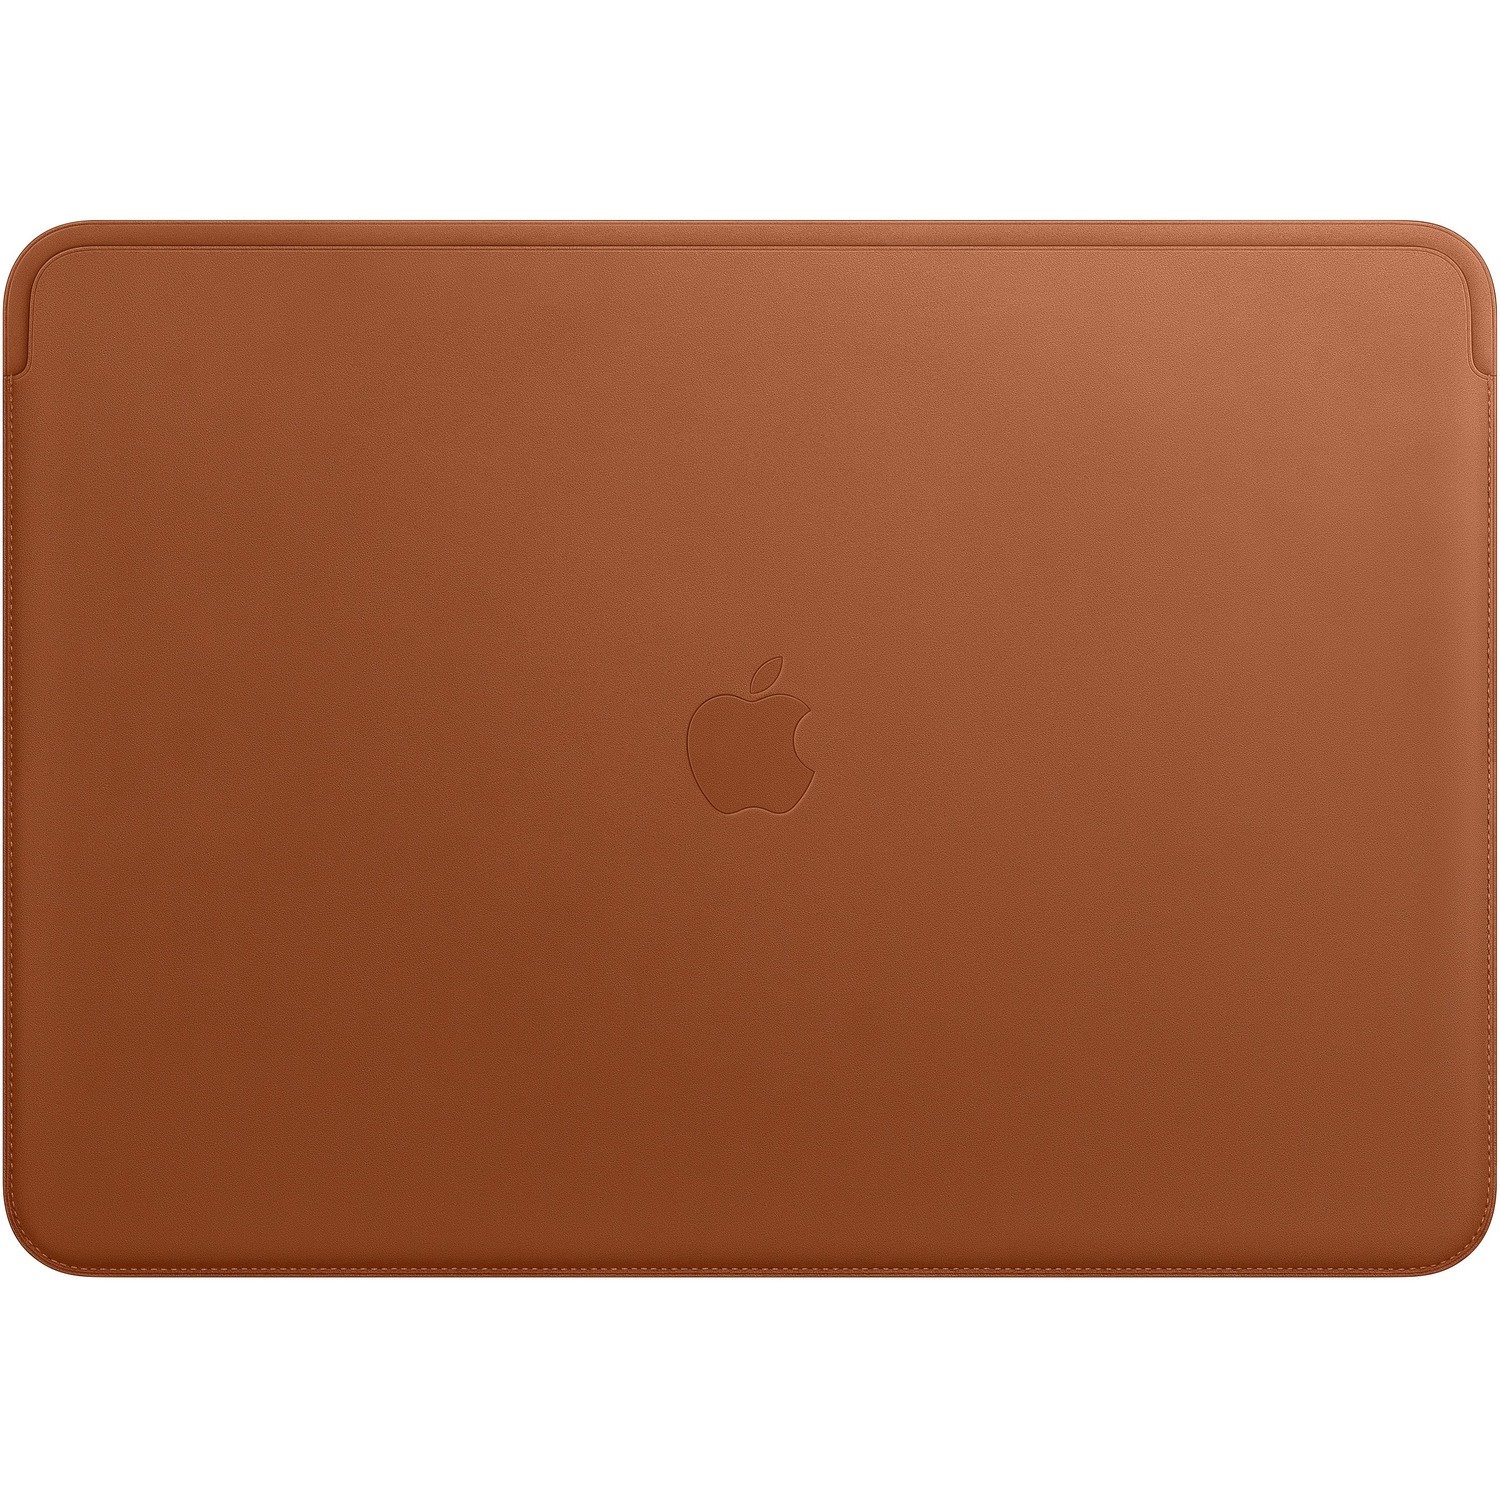 Apple Carrying Case (Sleeve) for 13" MacBook Pro - Saddle Brown